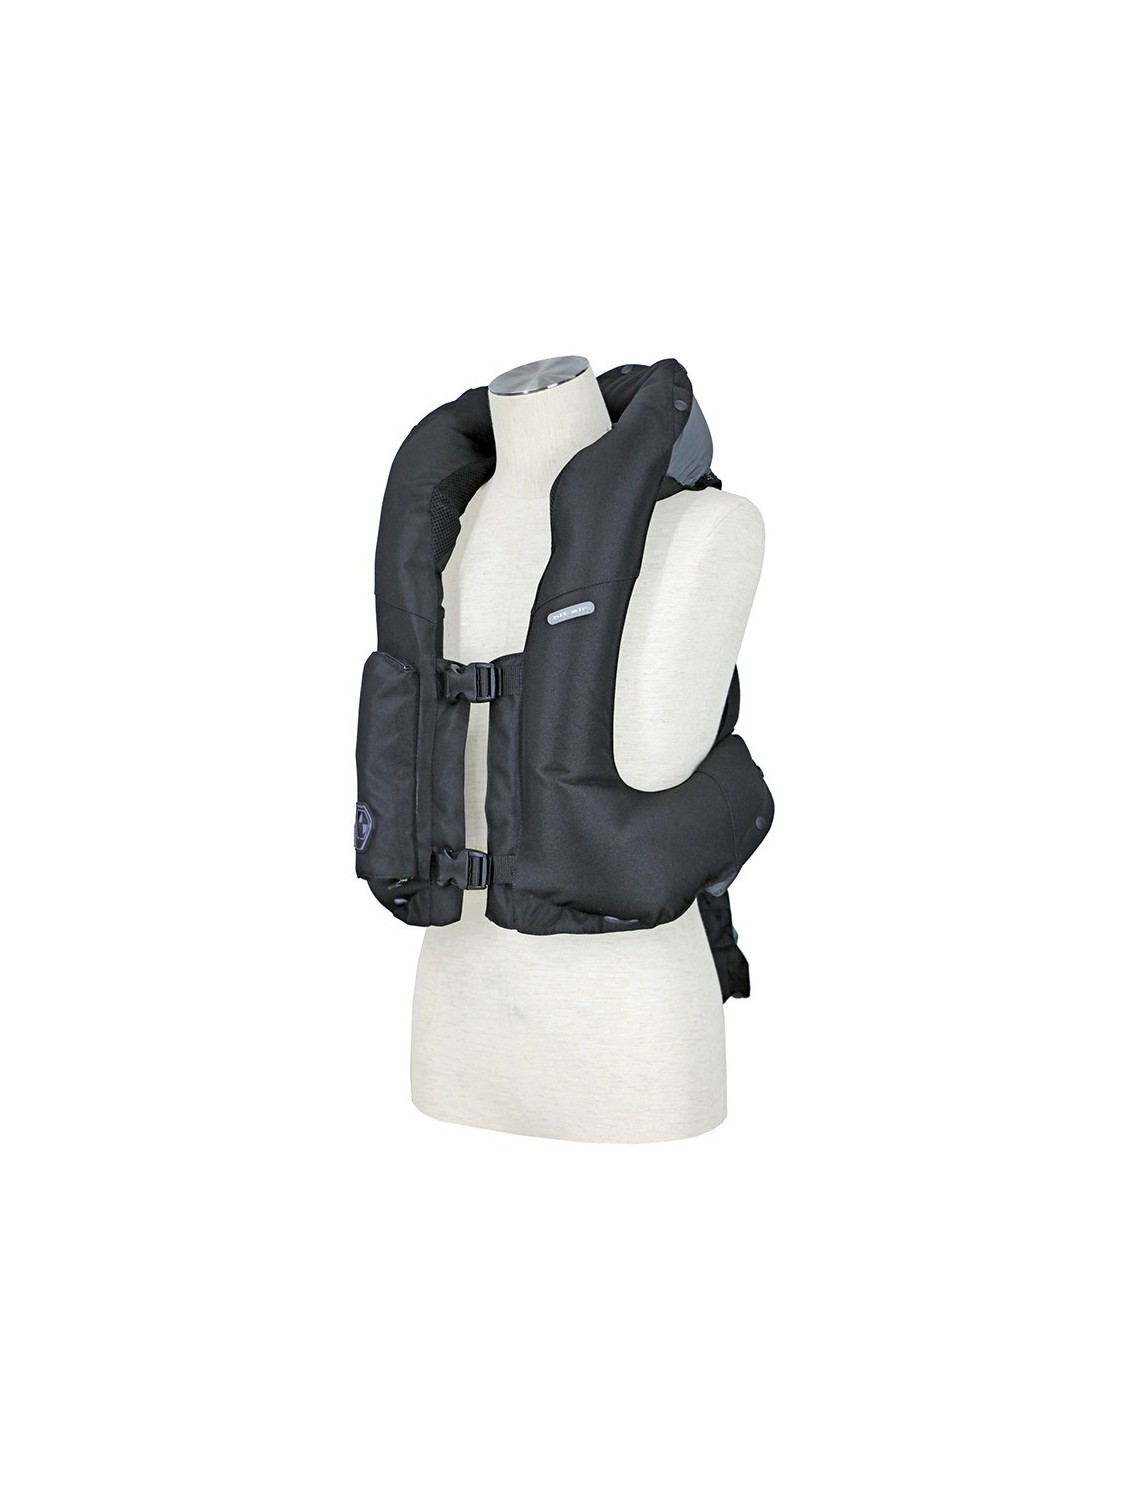 GILET AIRBAG COMPLET HIT AIR